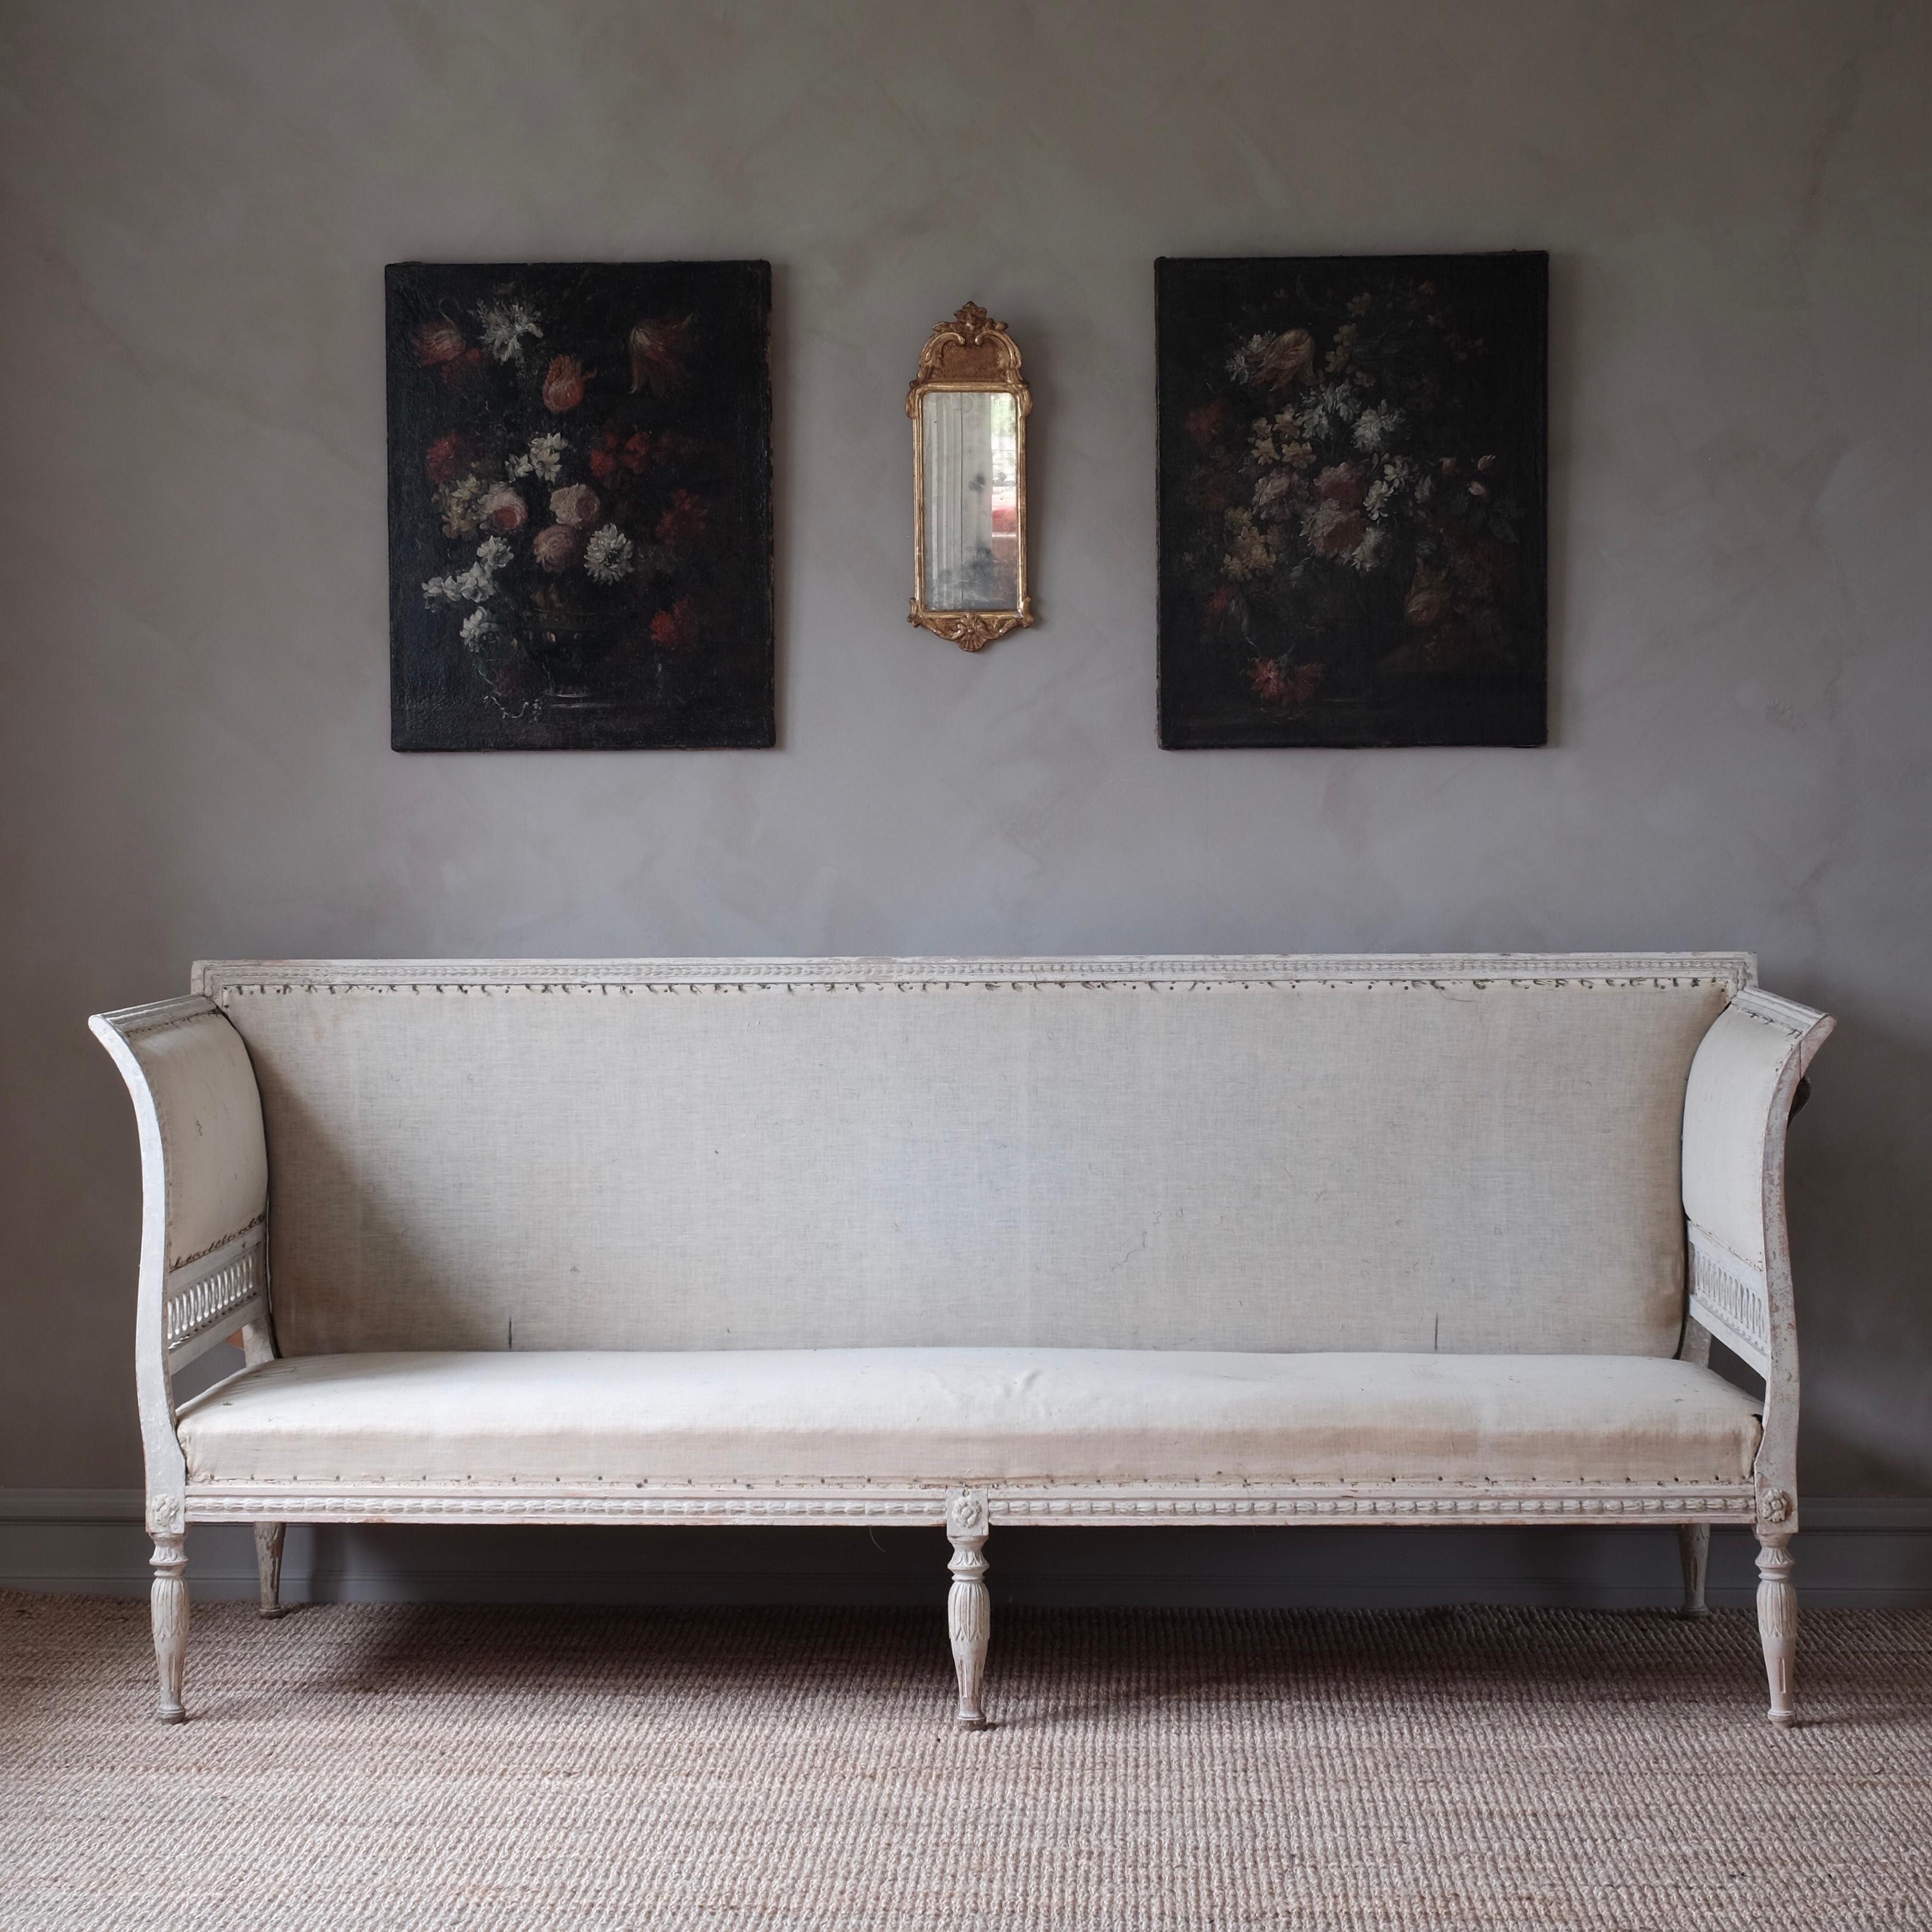 Fine 19th-century late Gustavian sofa in original color and padding, circa 1810, Sweden. In good original condition with wear and tear consistent with age and use.